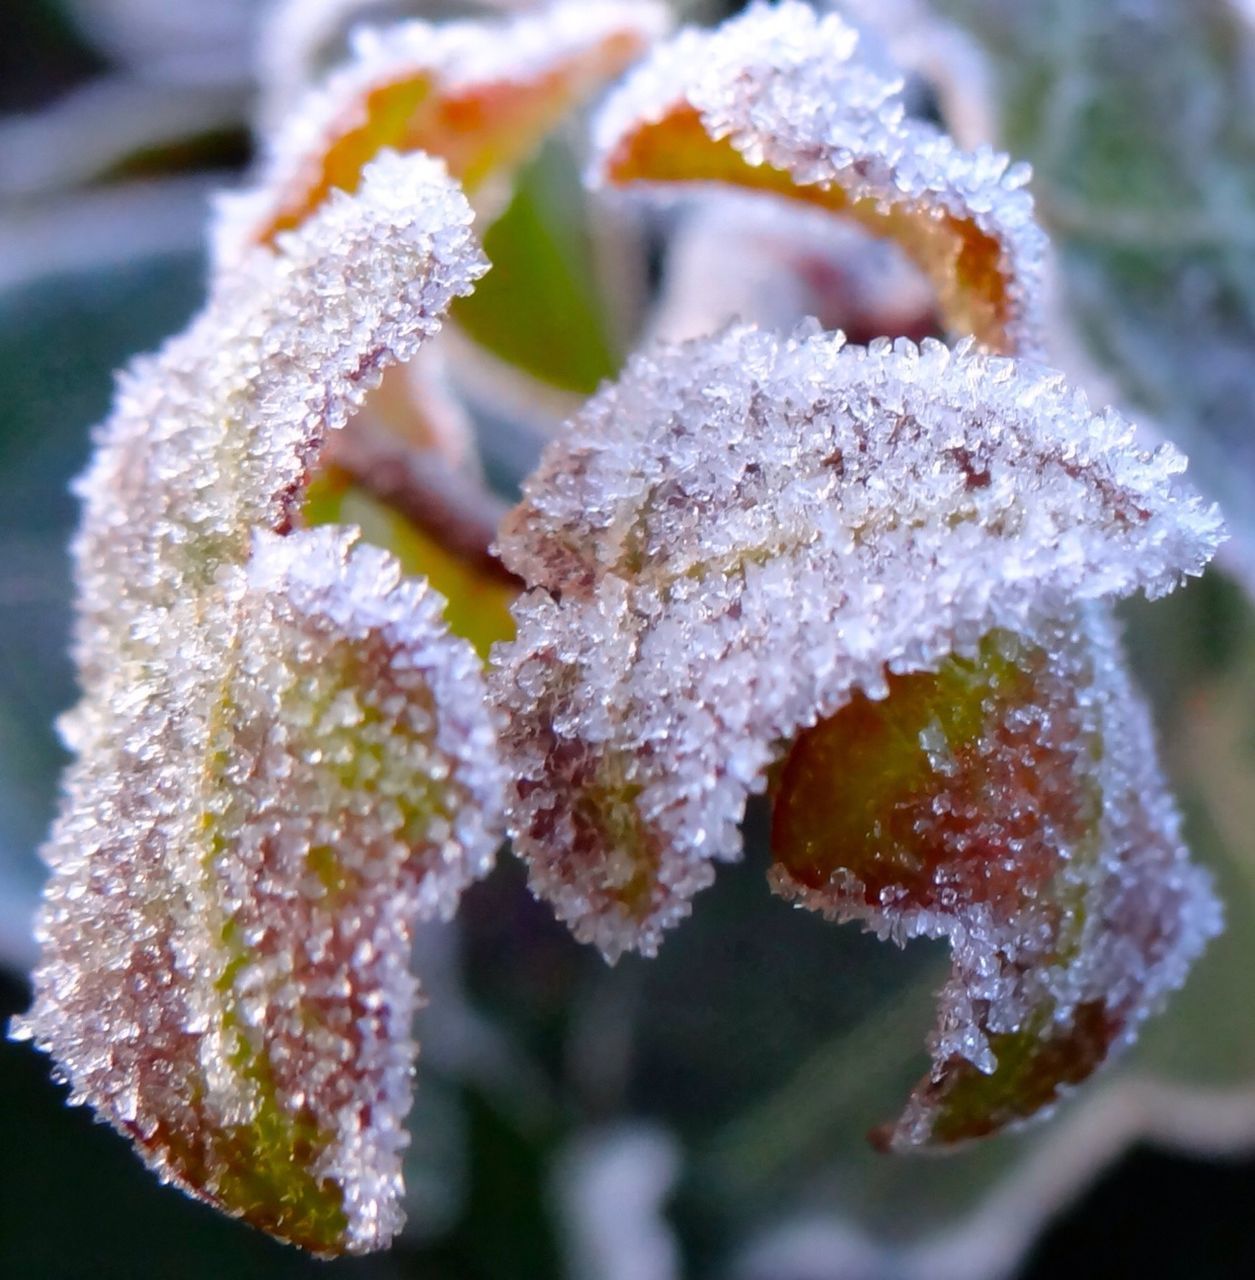 CLOSE-UP OF WHITE FLOWERS ON FROZEN